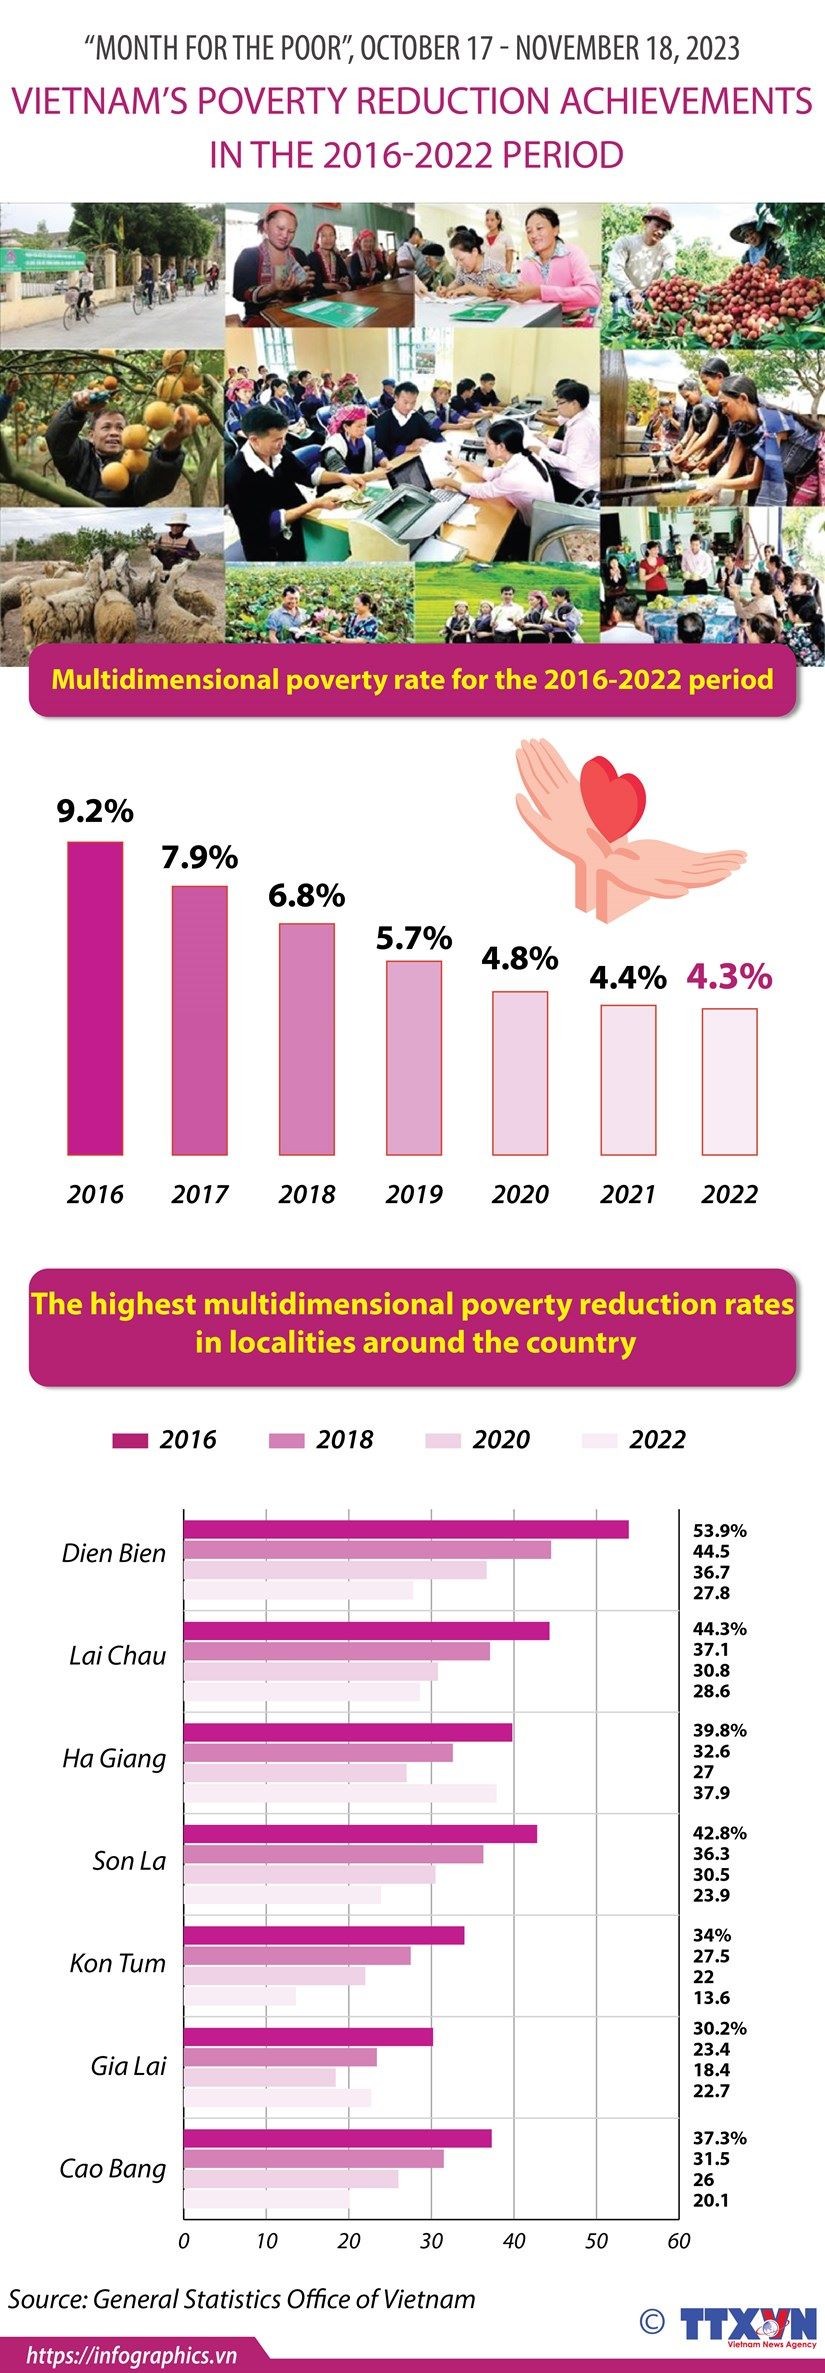 Vietnam’s poverty reduction achievements in the 2016-2022 period